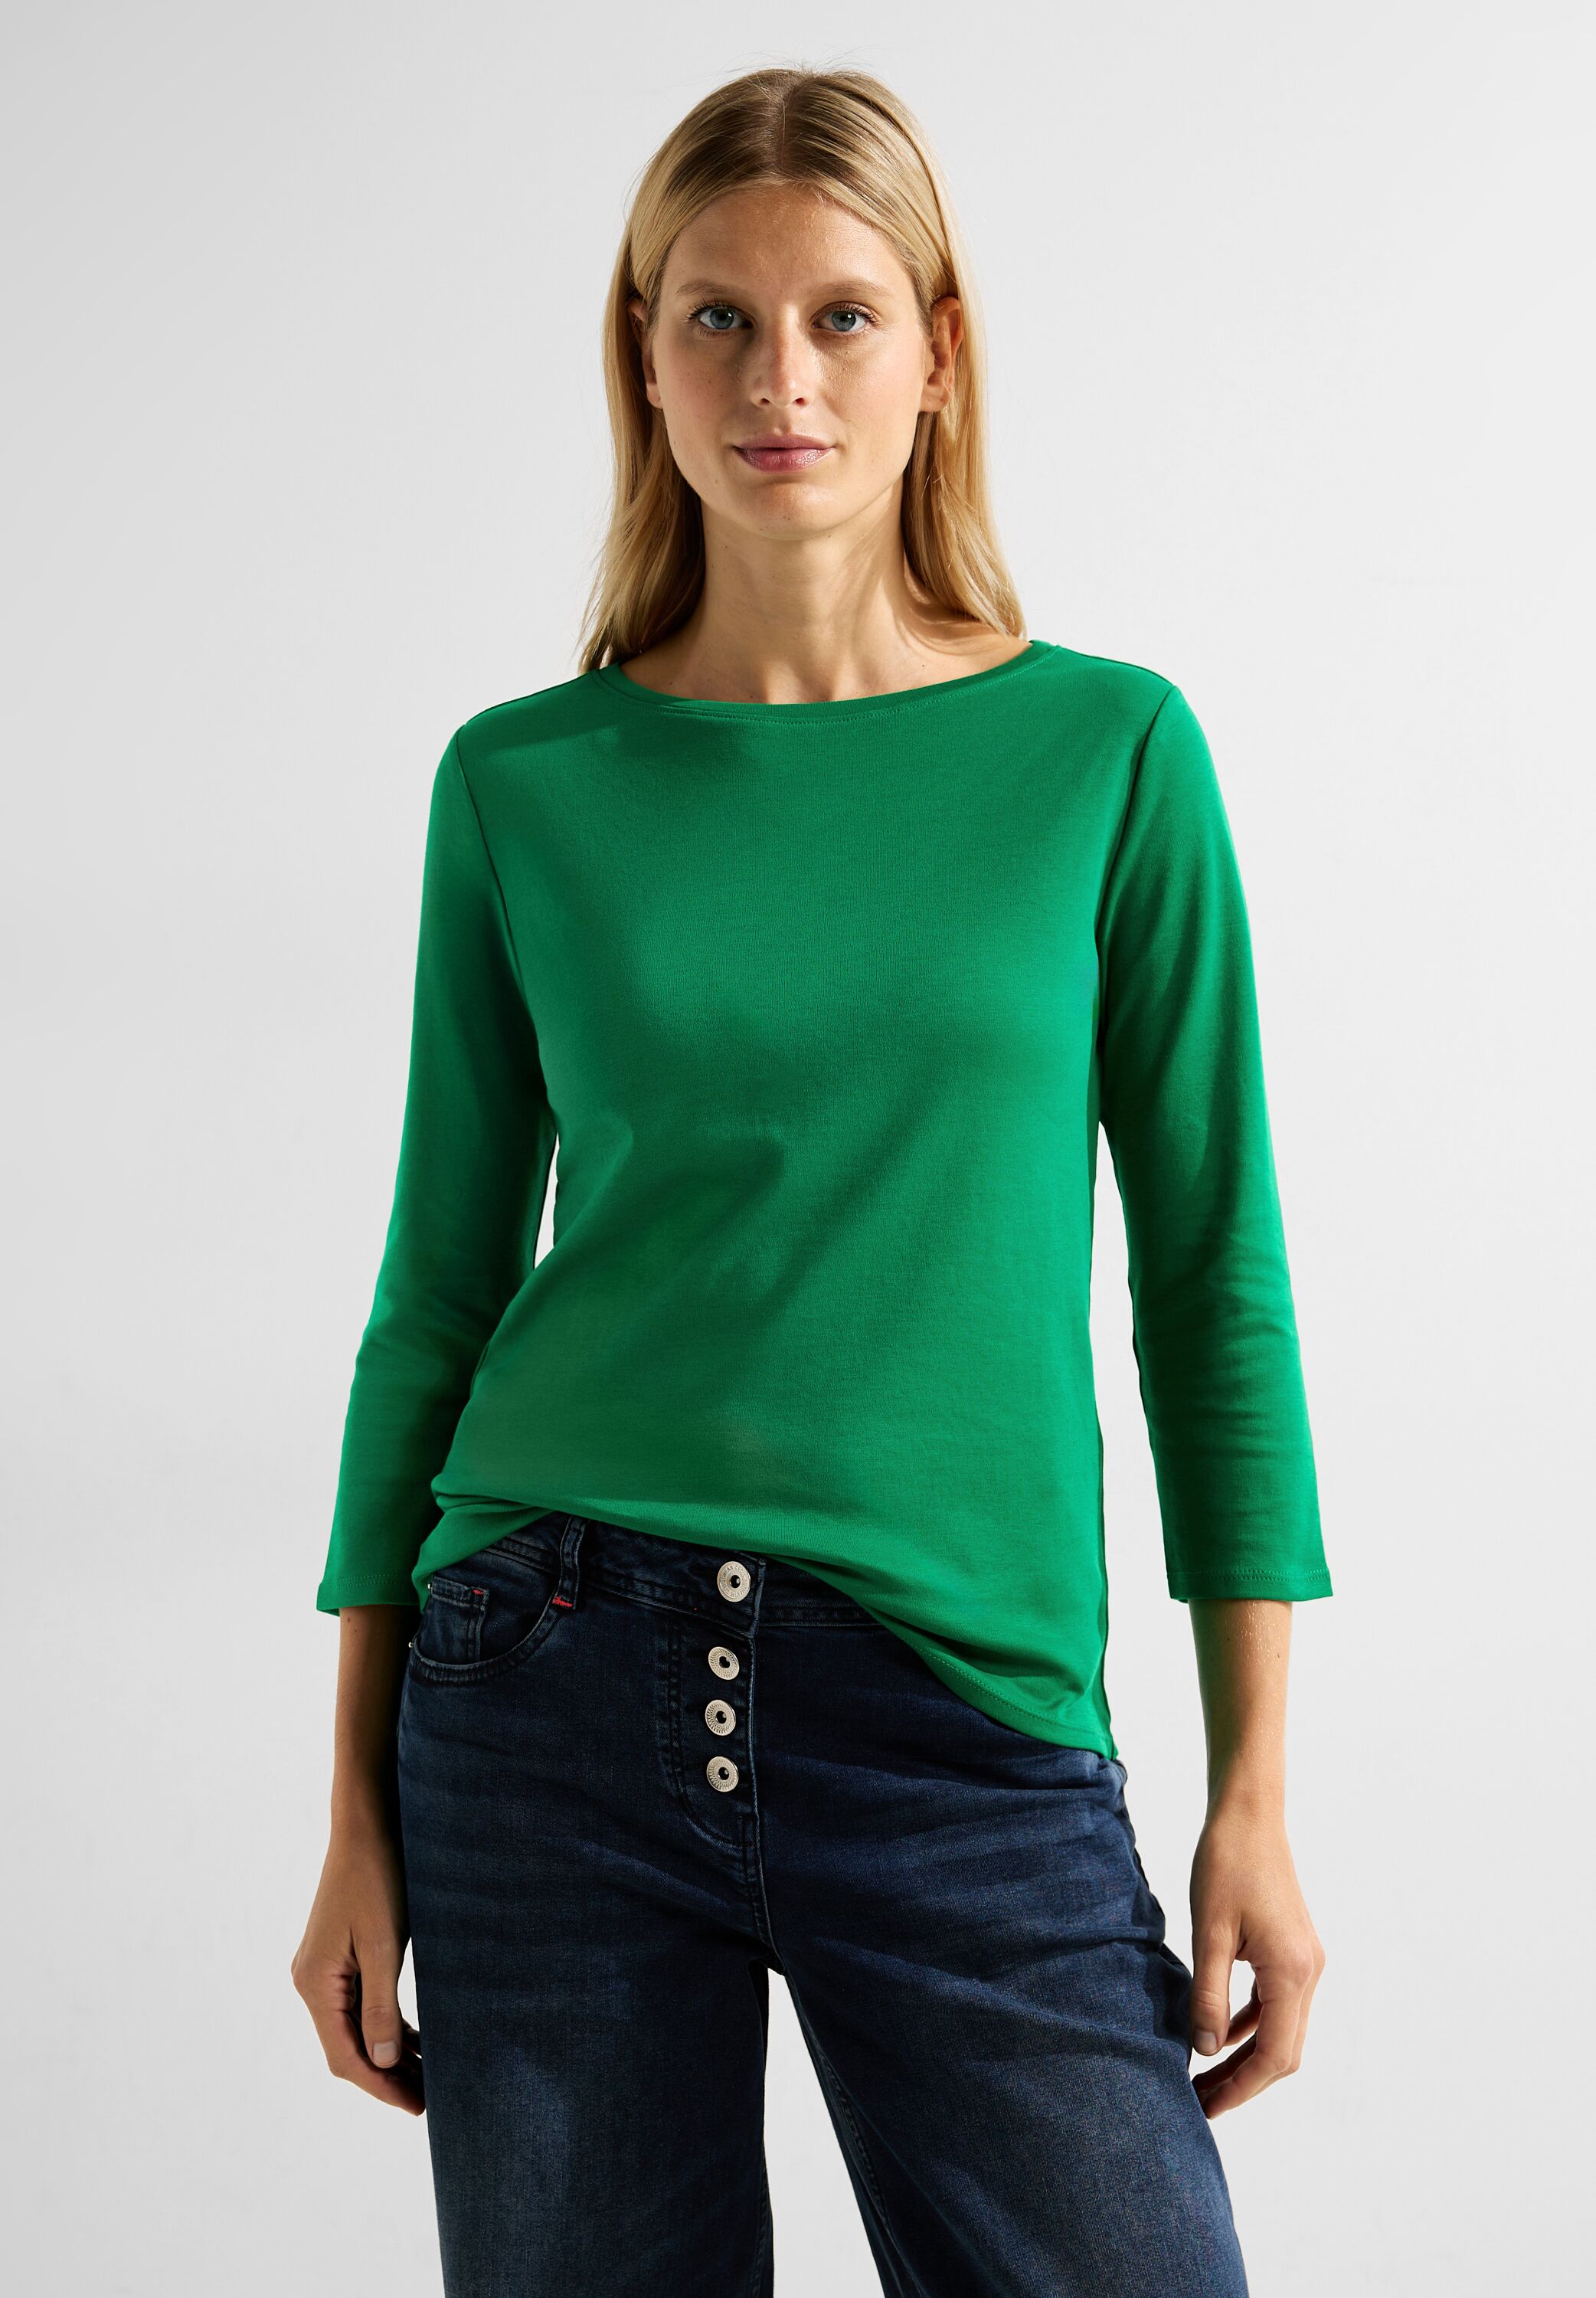 CECIL Shirt in Easy B317389-15069 - Mode CONCEPT Green